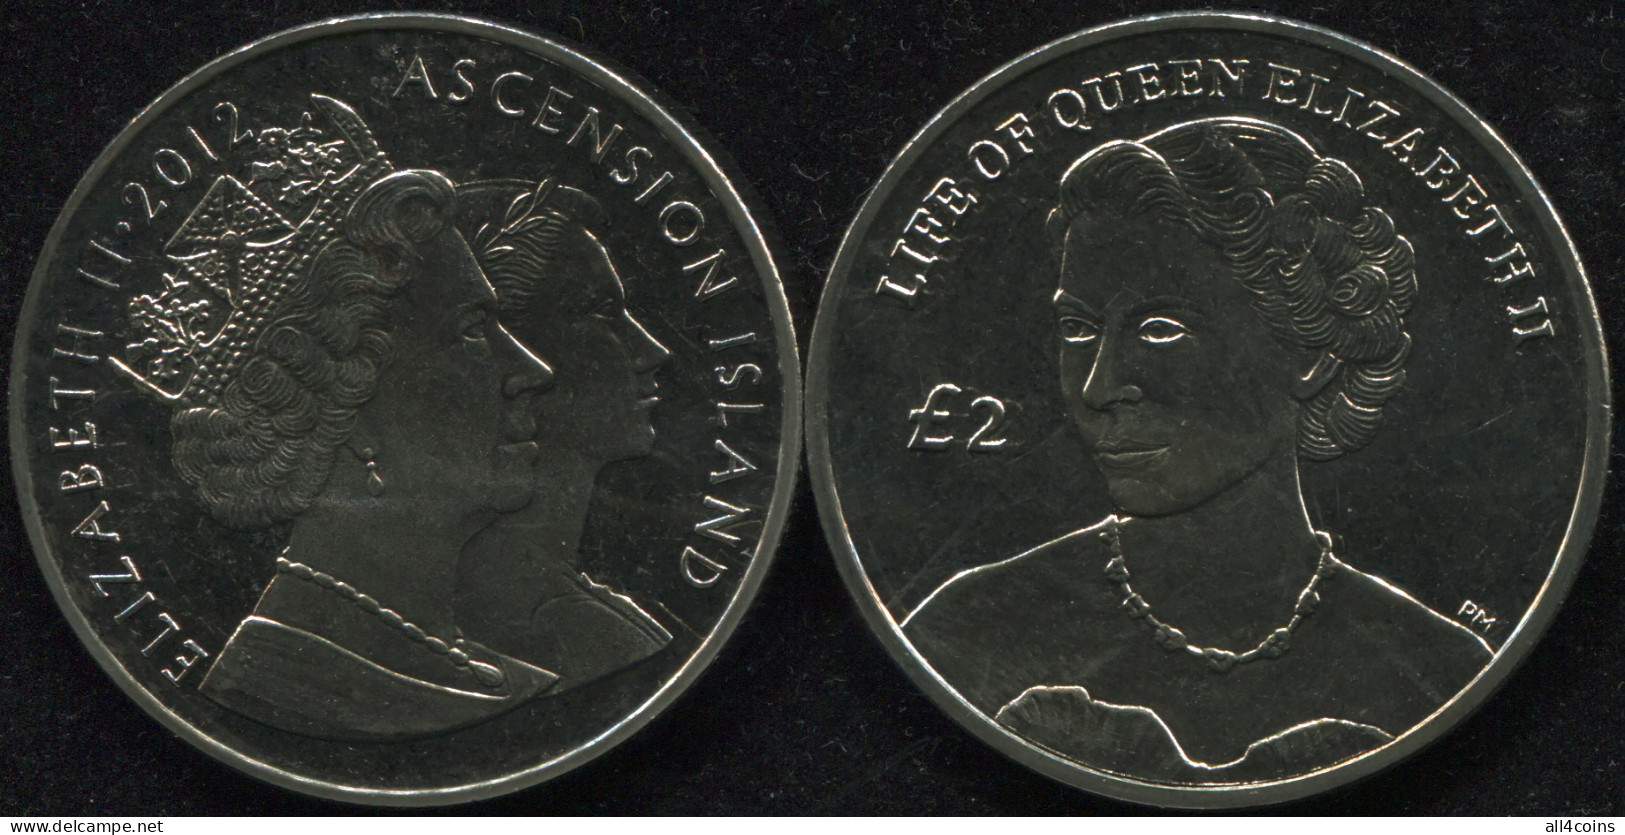 Ascension Island. 2 Pounds. 2012 (Coin KM#21. Unc) Life Of Queen Elizabeth II - Ascension Island